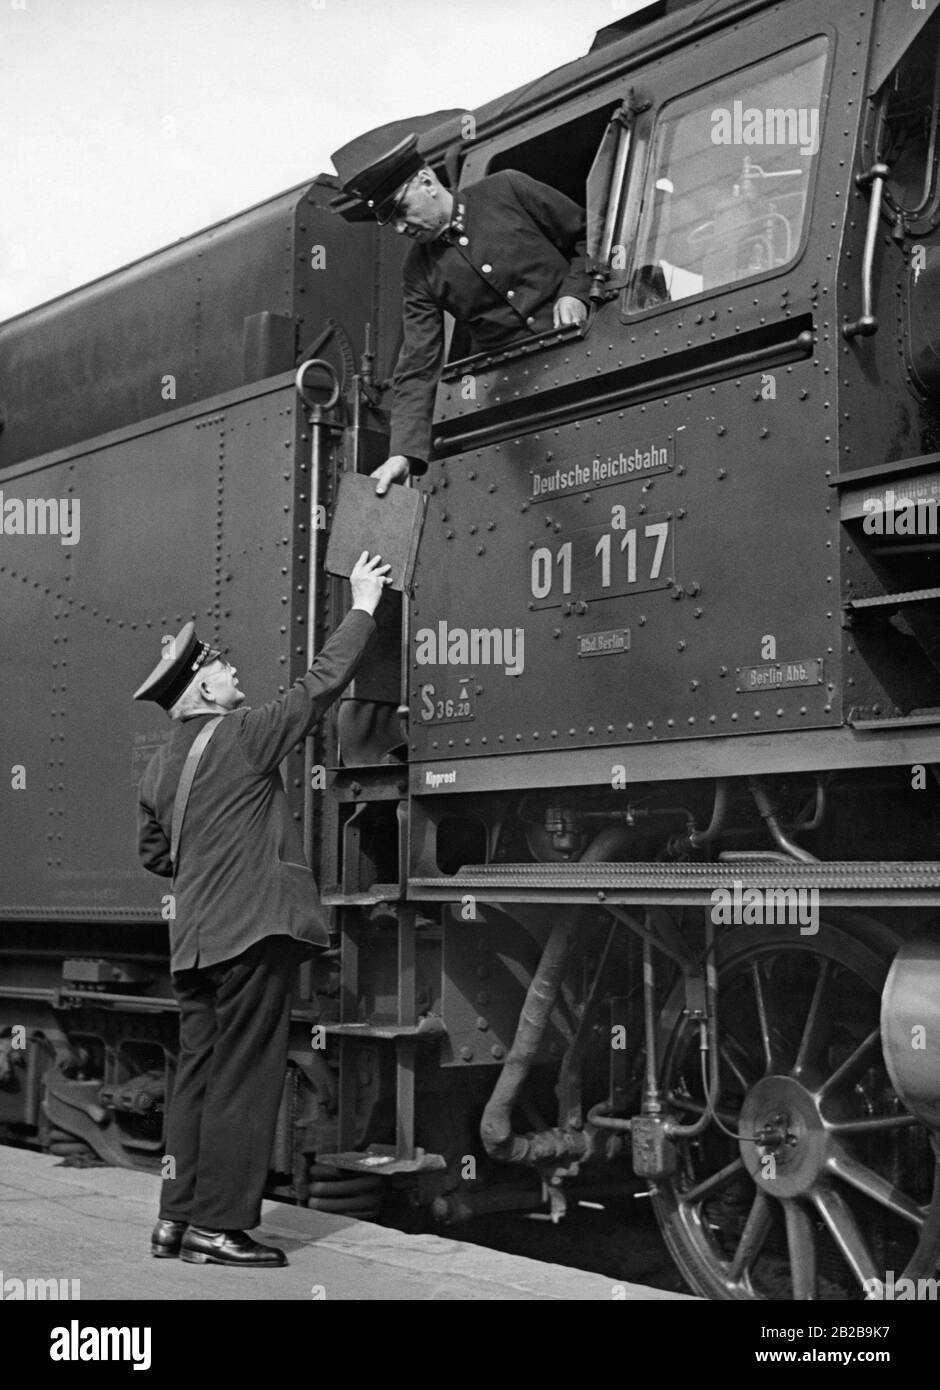 The conductor reports to the locomotive engineer the weight of the train, in other words the number of the attached cars. The picture shows a locomotive of the Deutsche Reichsbahn (German Reich Railway) with the number 01117. Stock Photo